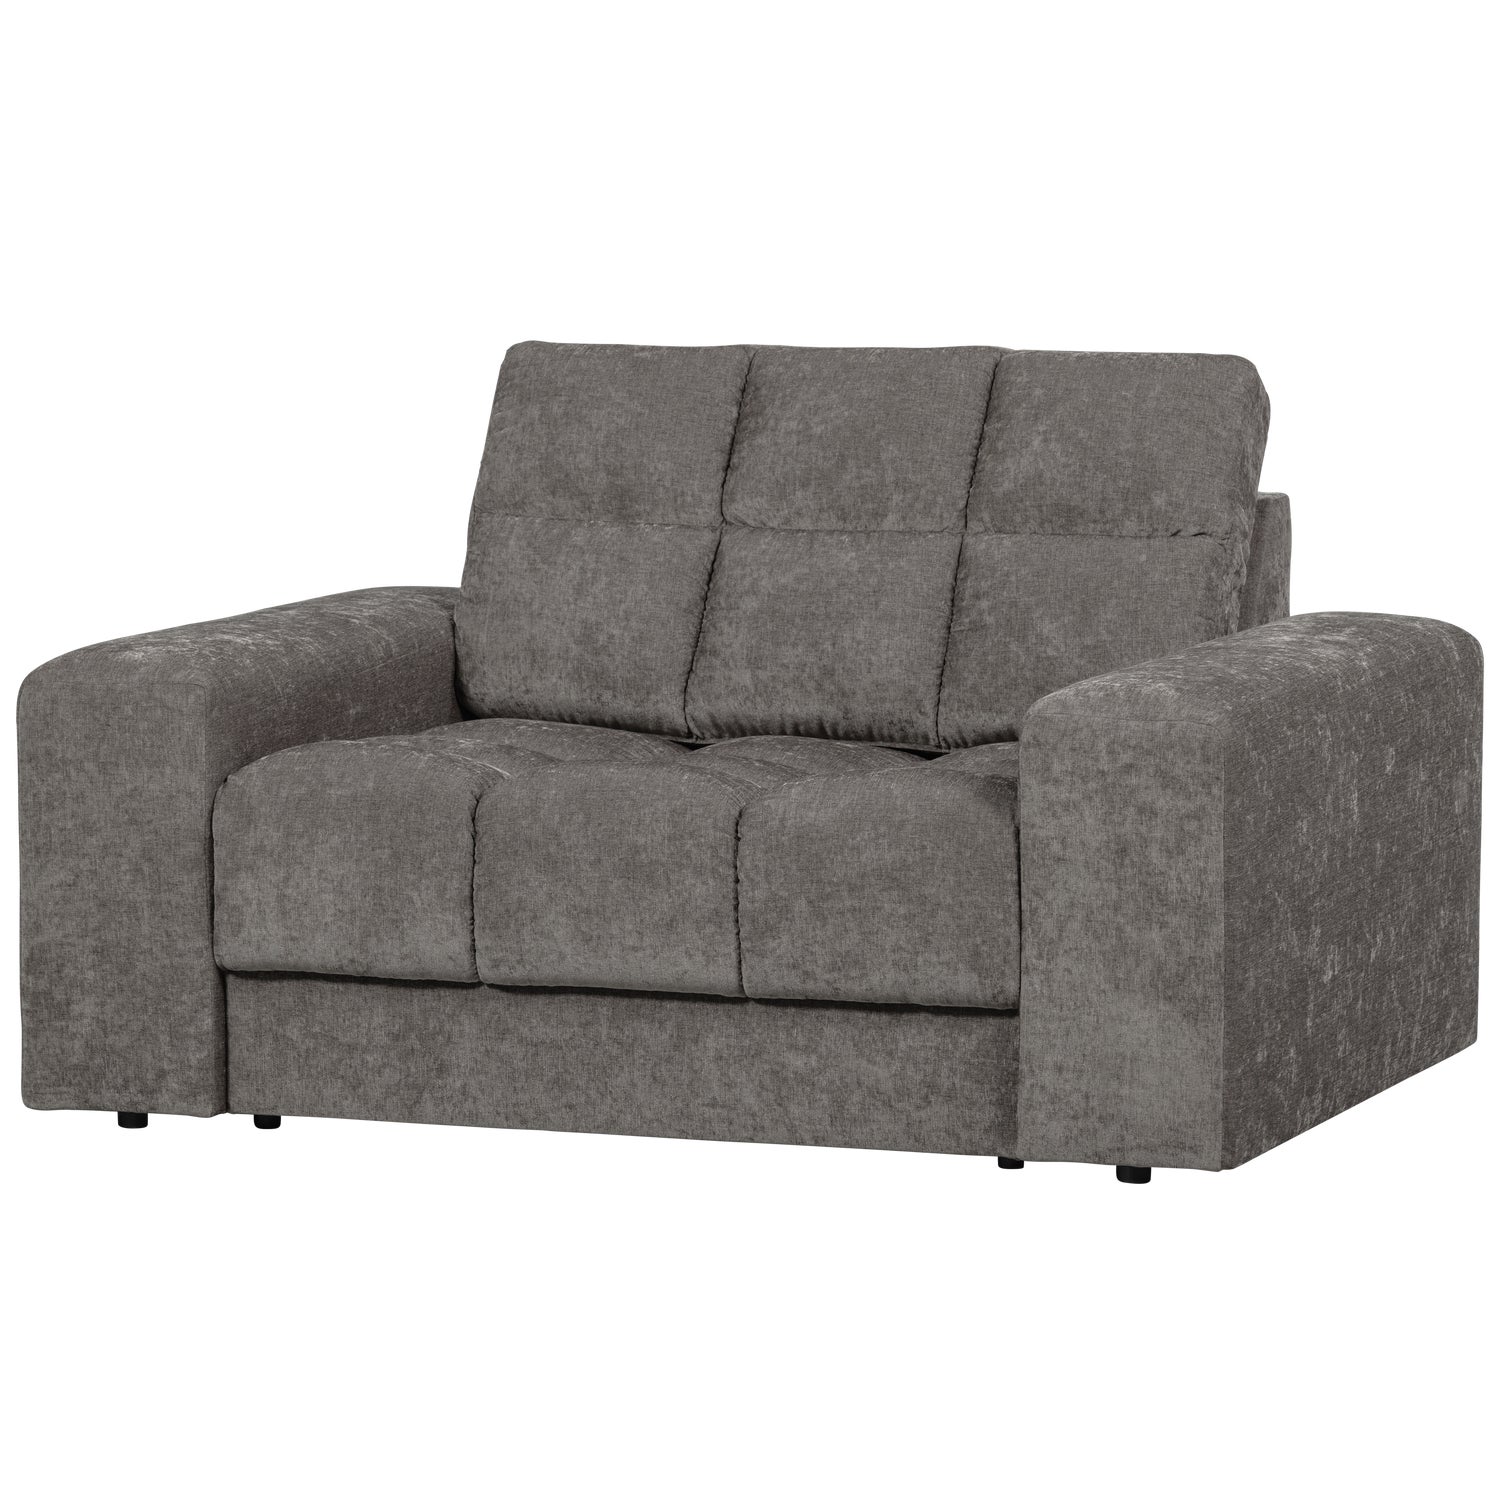 379006-M-02_VS_WE_Second_date_loveseat_vintage_mouse_SA.png?auto=webp&format=png&width=1500&height=1500